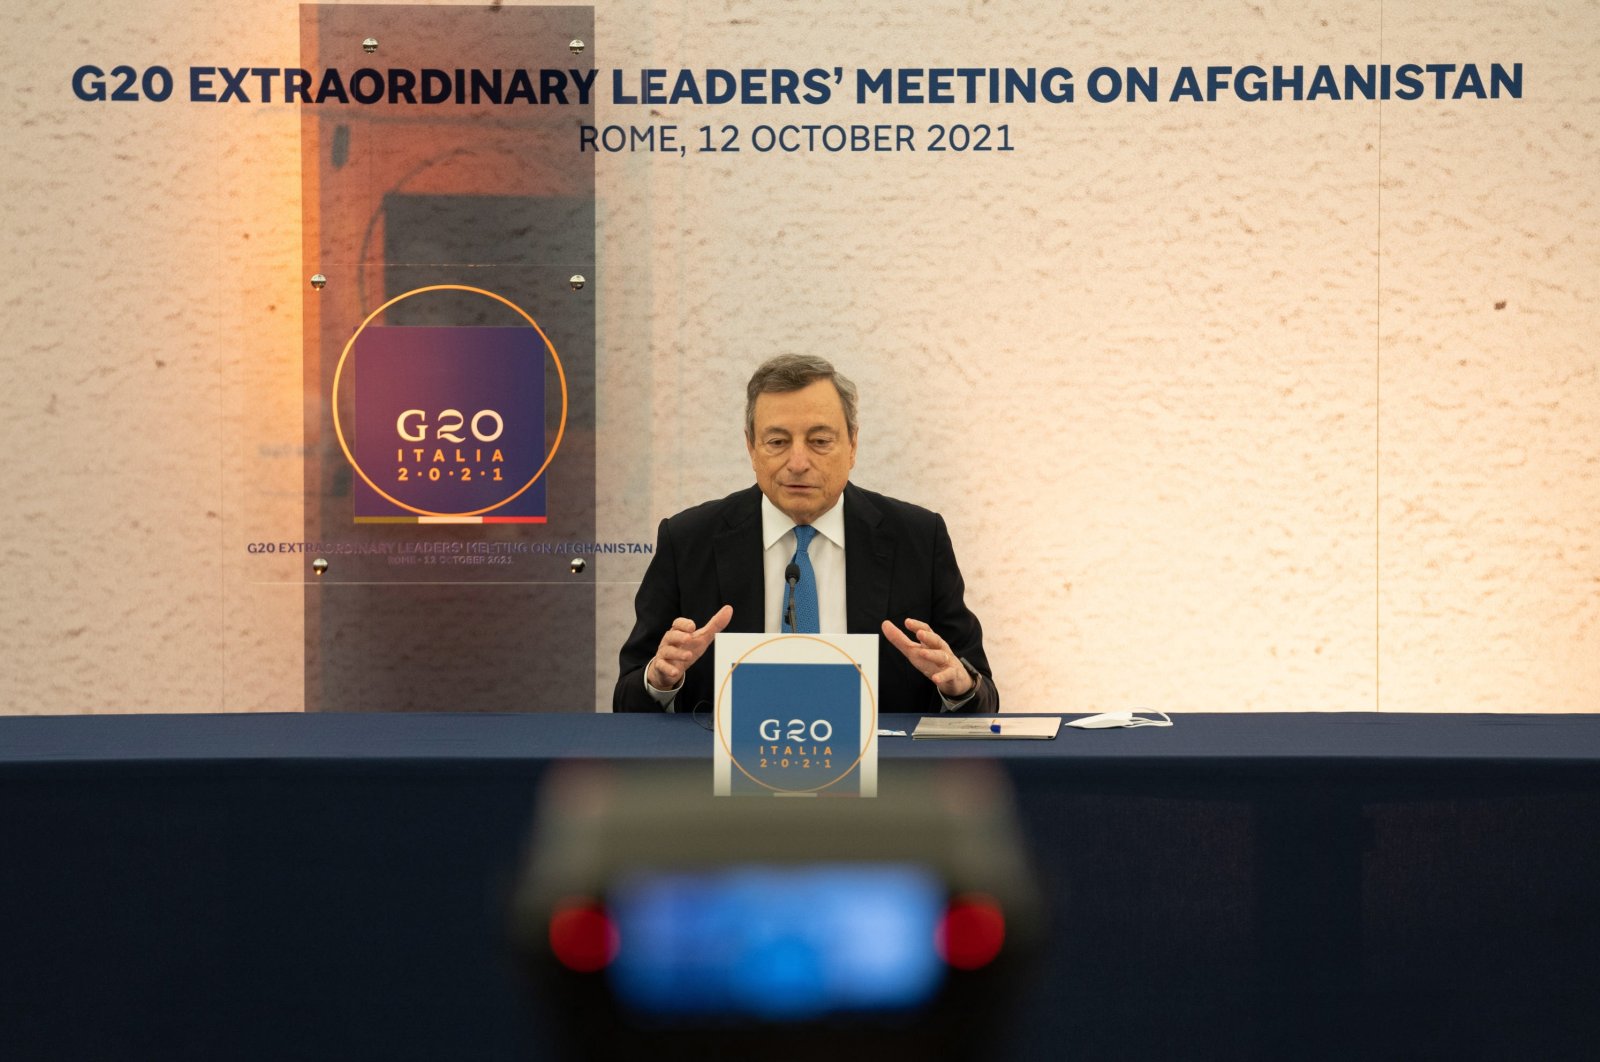 Italian Prime Minister Mario Draghi attending a press conference after the G-20 Extraordinary Leader's Meeting on Afghanistan at Palazzo Chigi, Rome, Italy, Oct. 12, 2021. (Italian government handout photo via EPA)